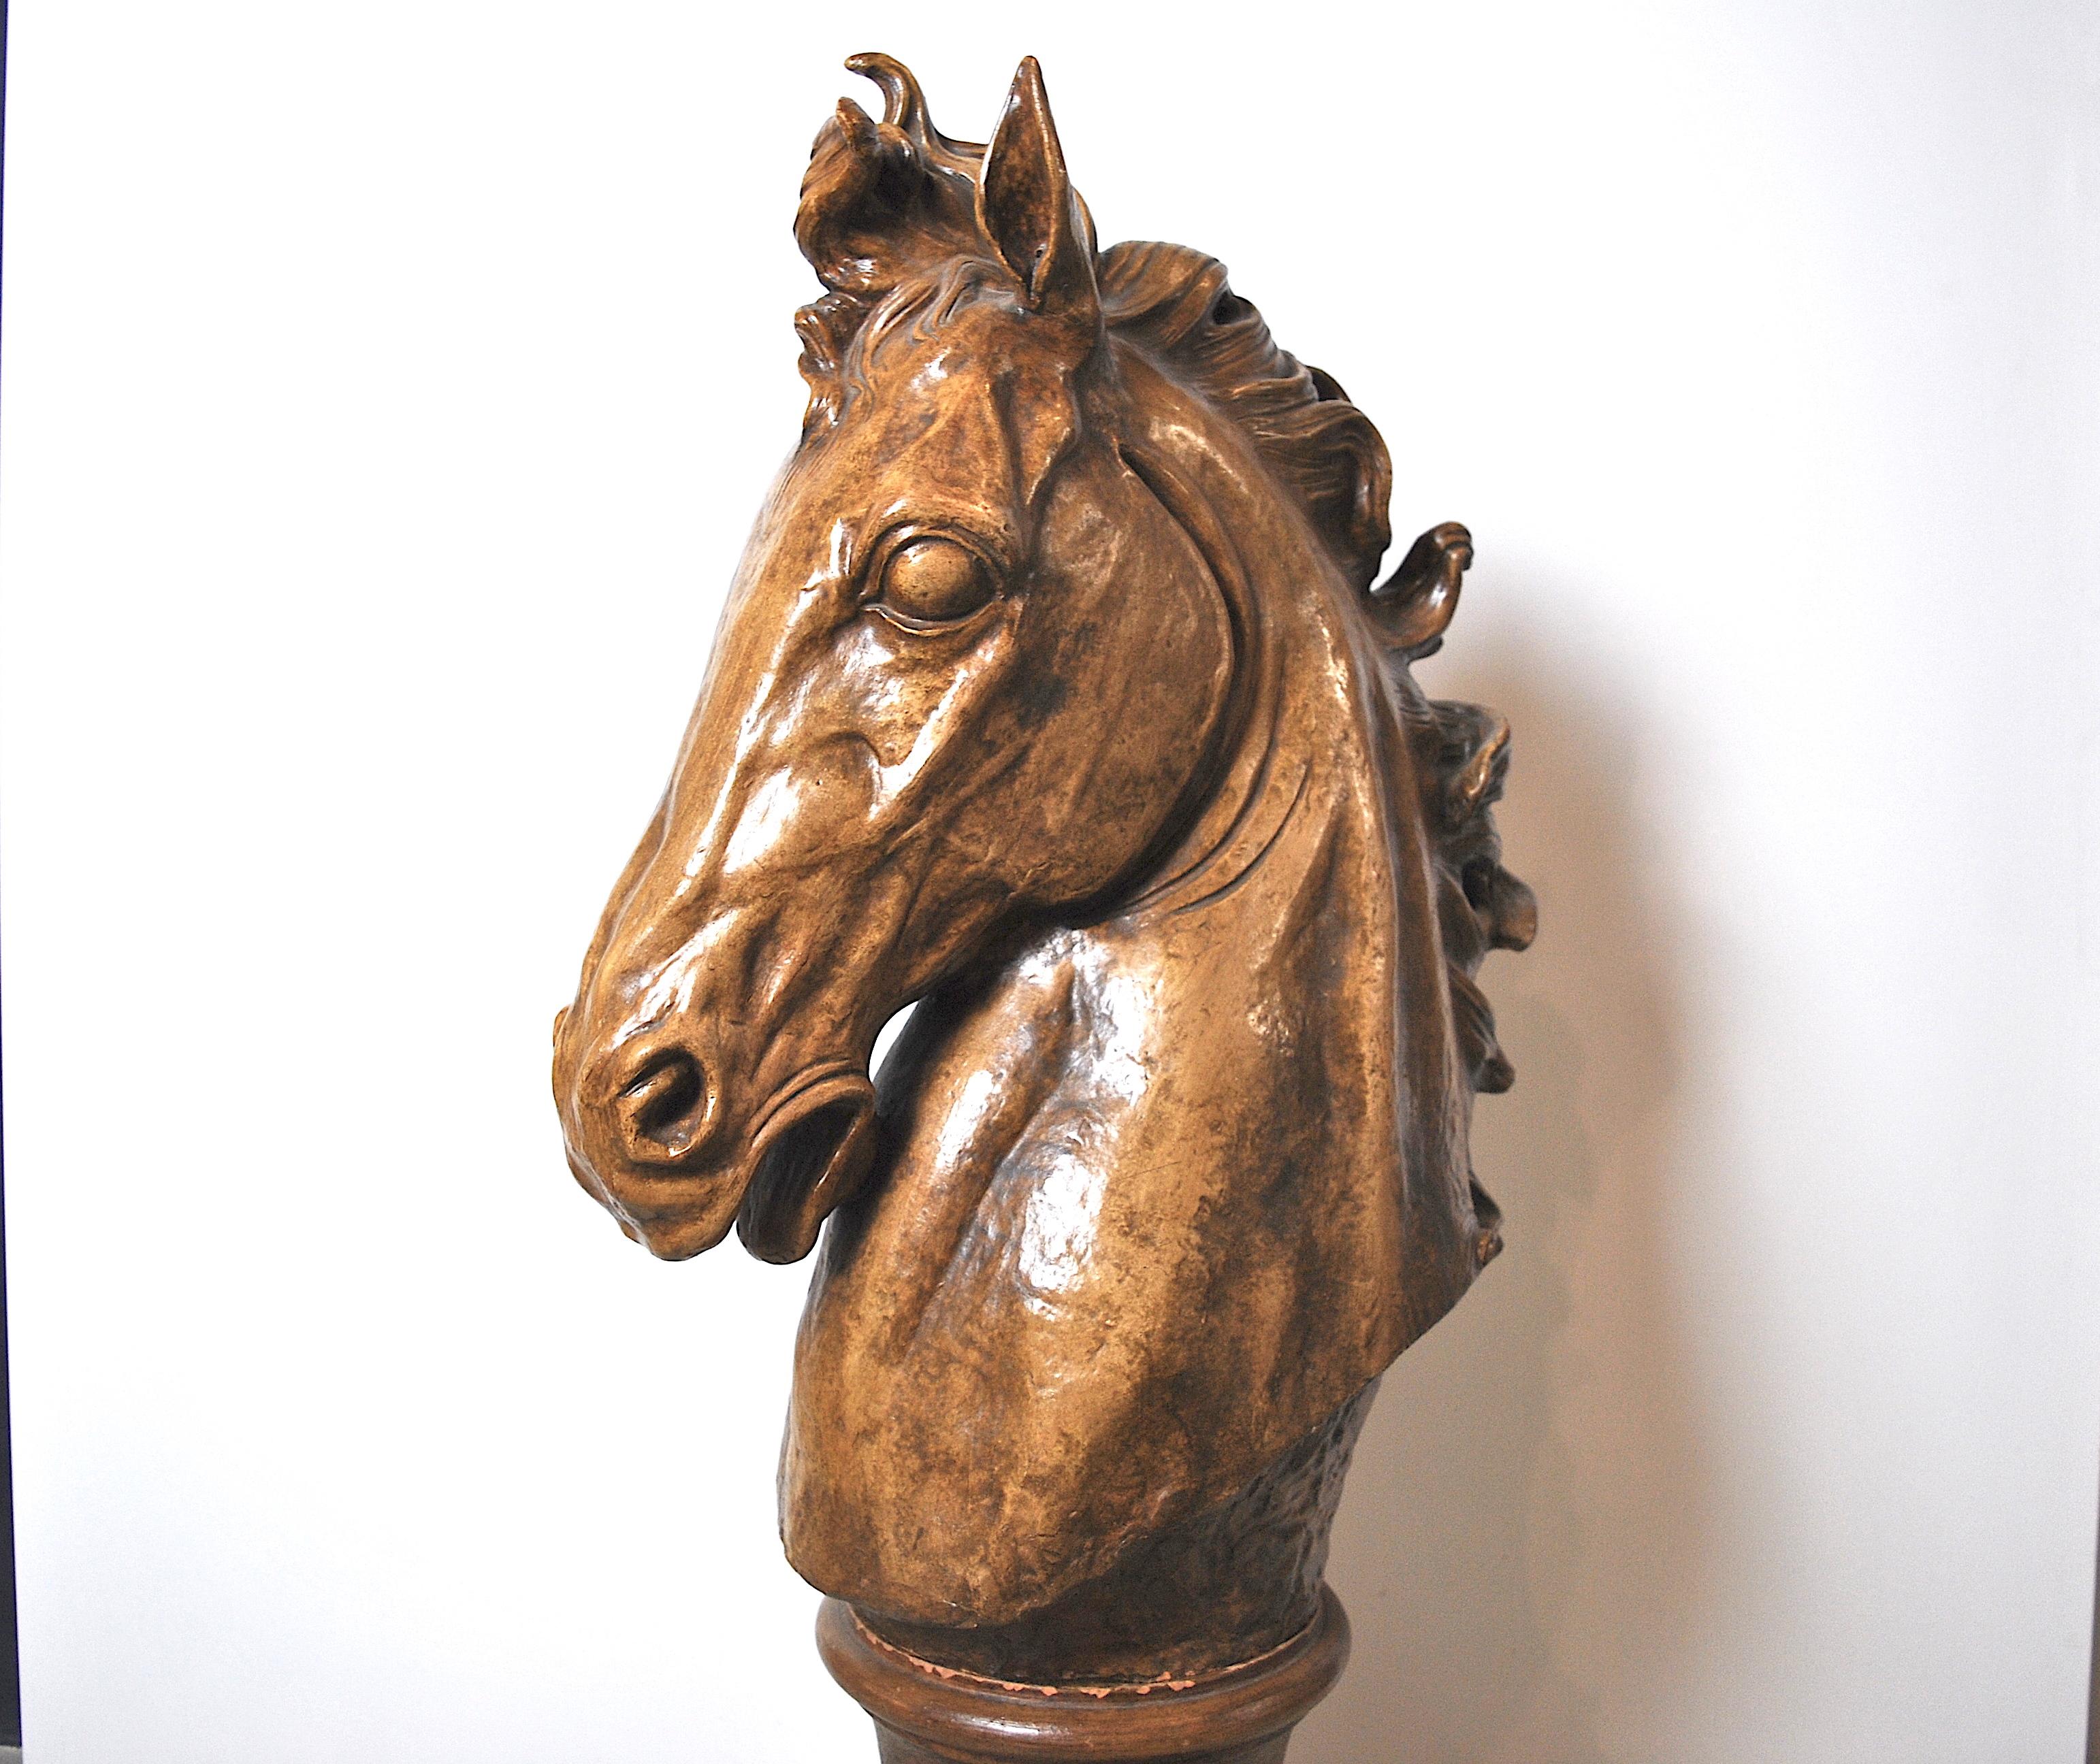 Midcentury ceramic sculpture of a horse head, typical Italian manufacture from the 1950s.